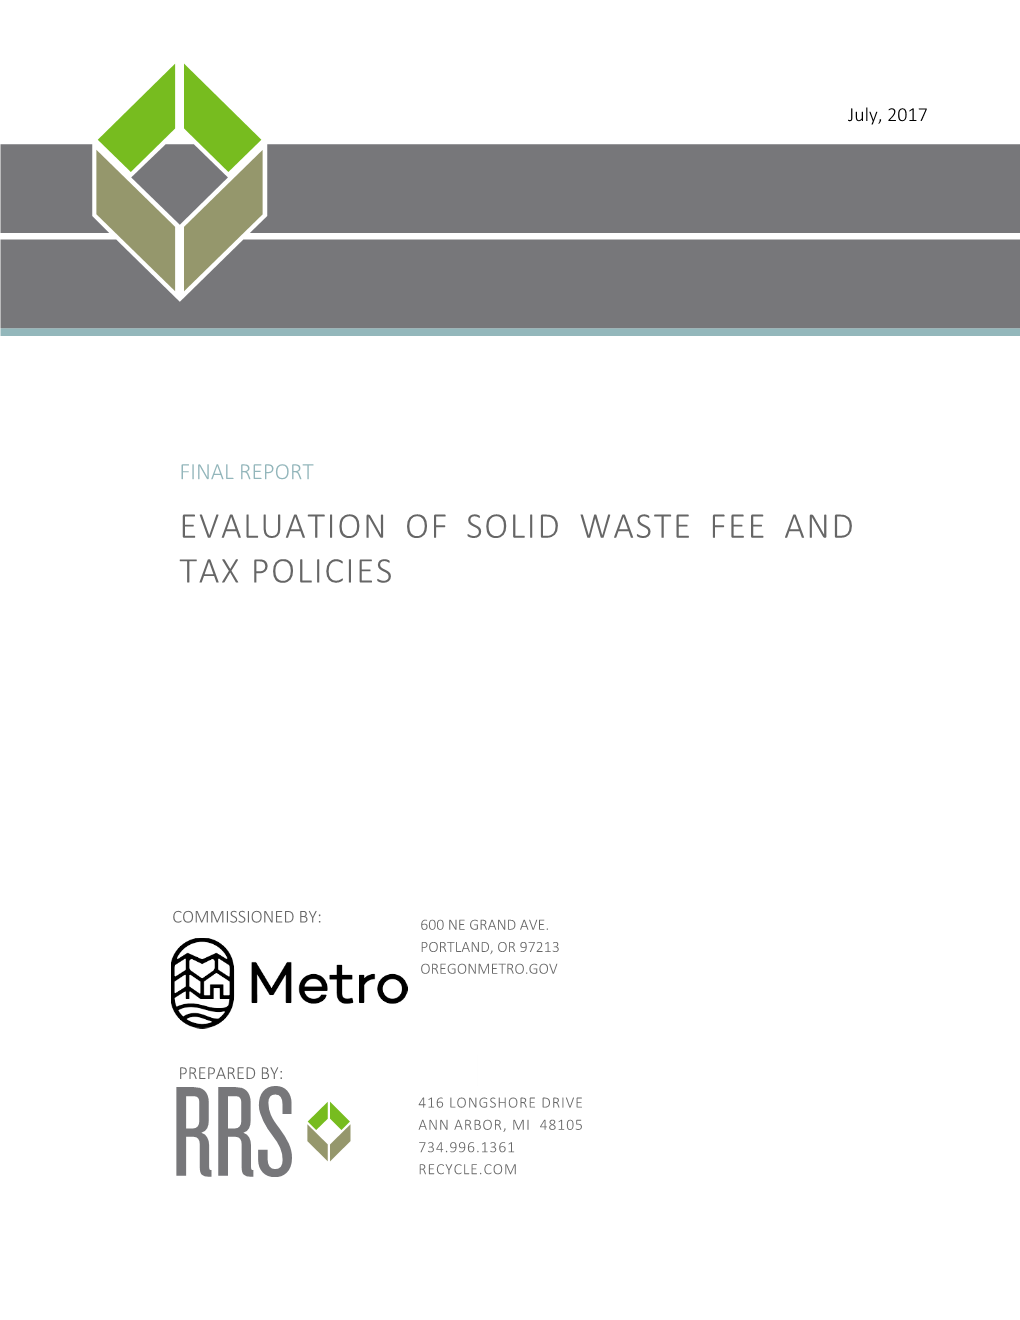 Evaluation of Solid Waste Fee and Tax Policies